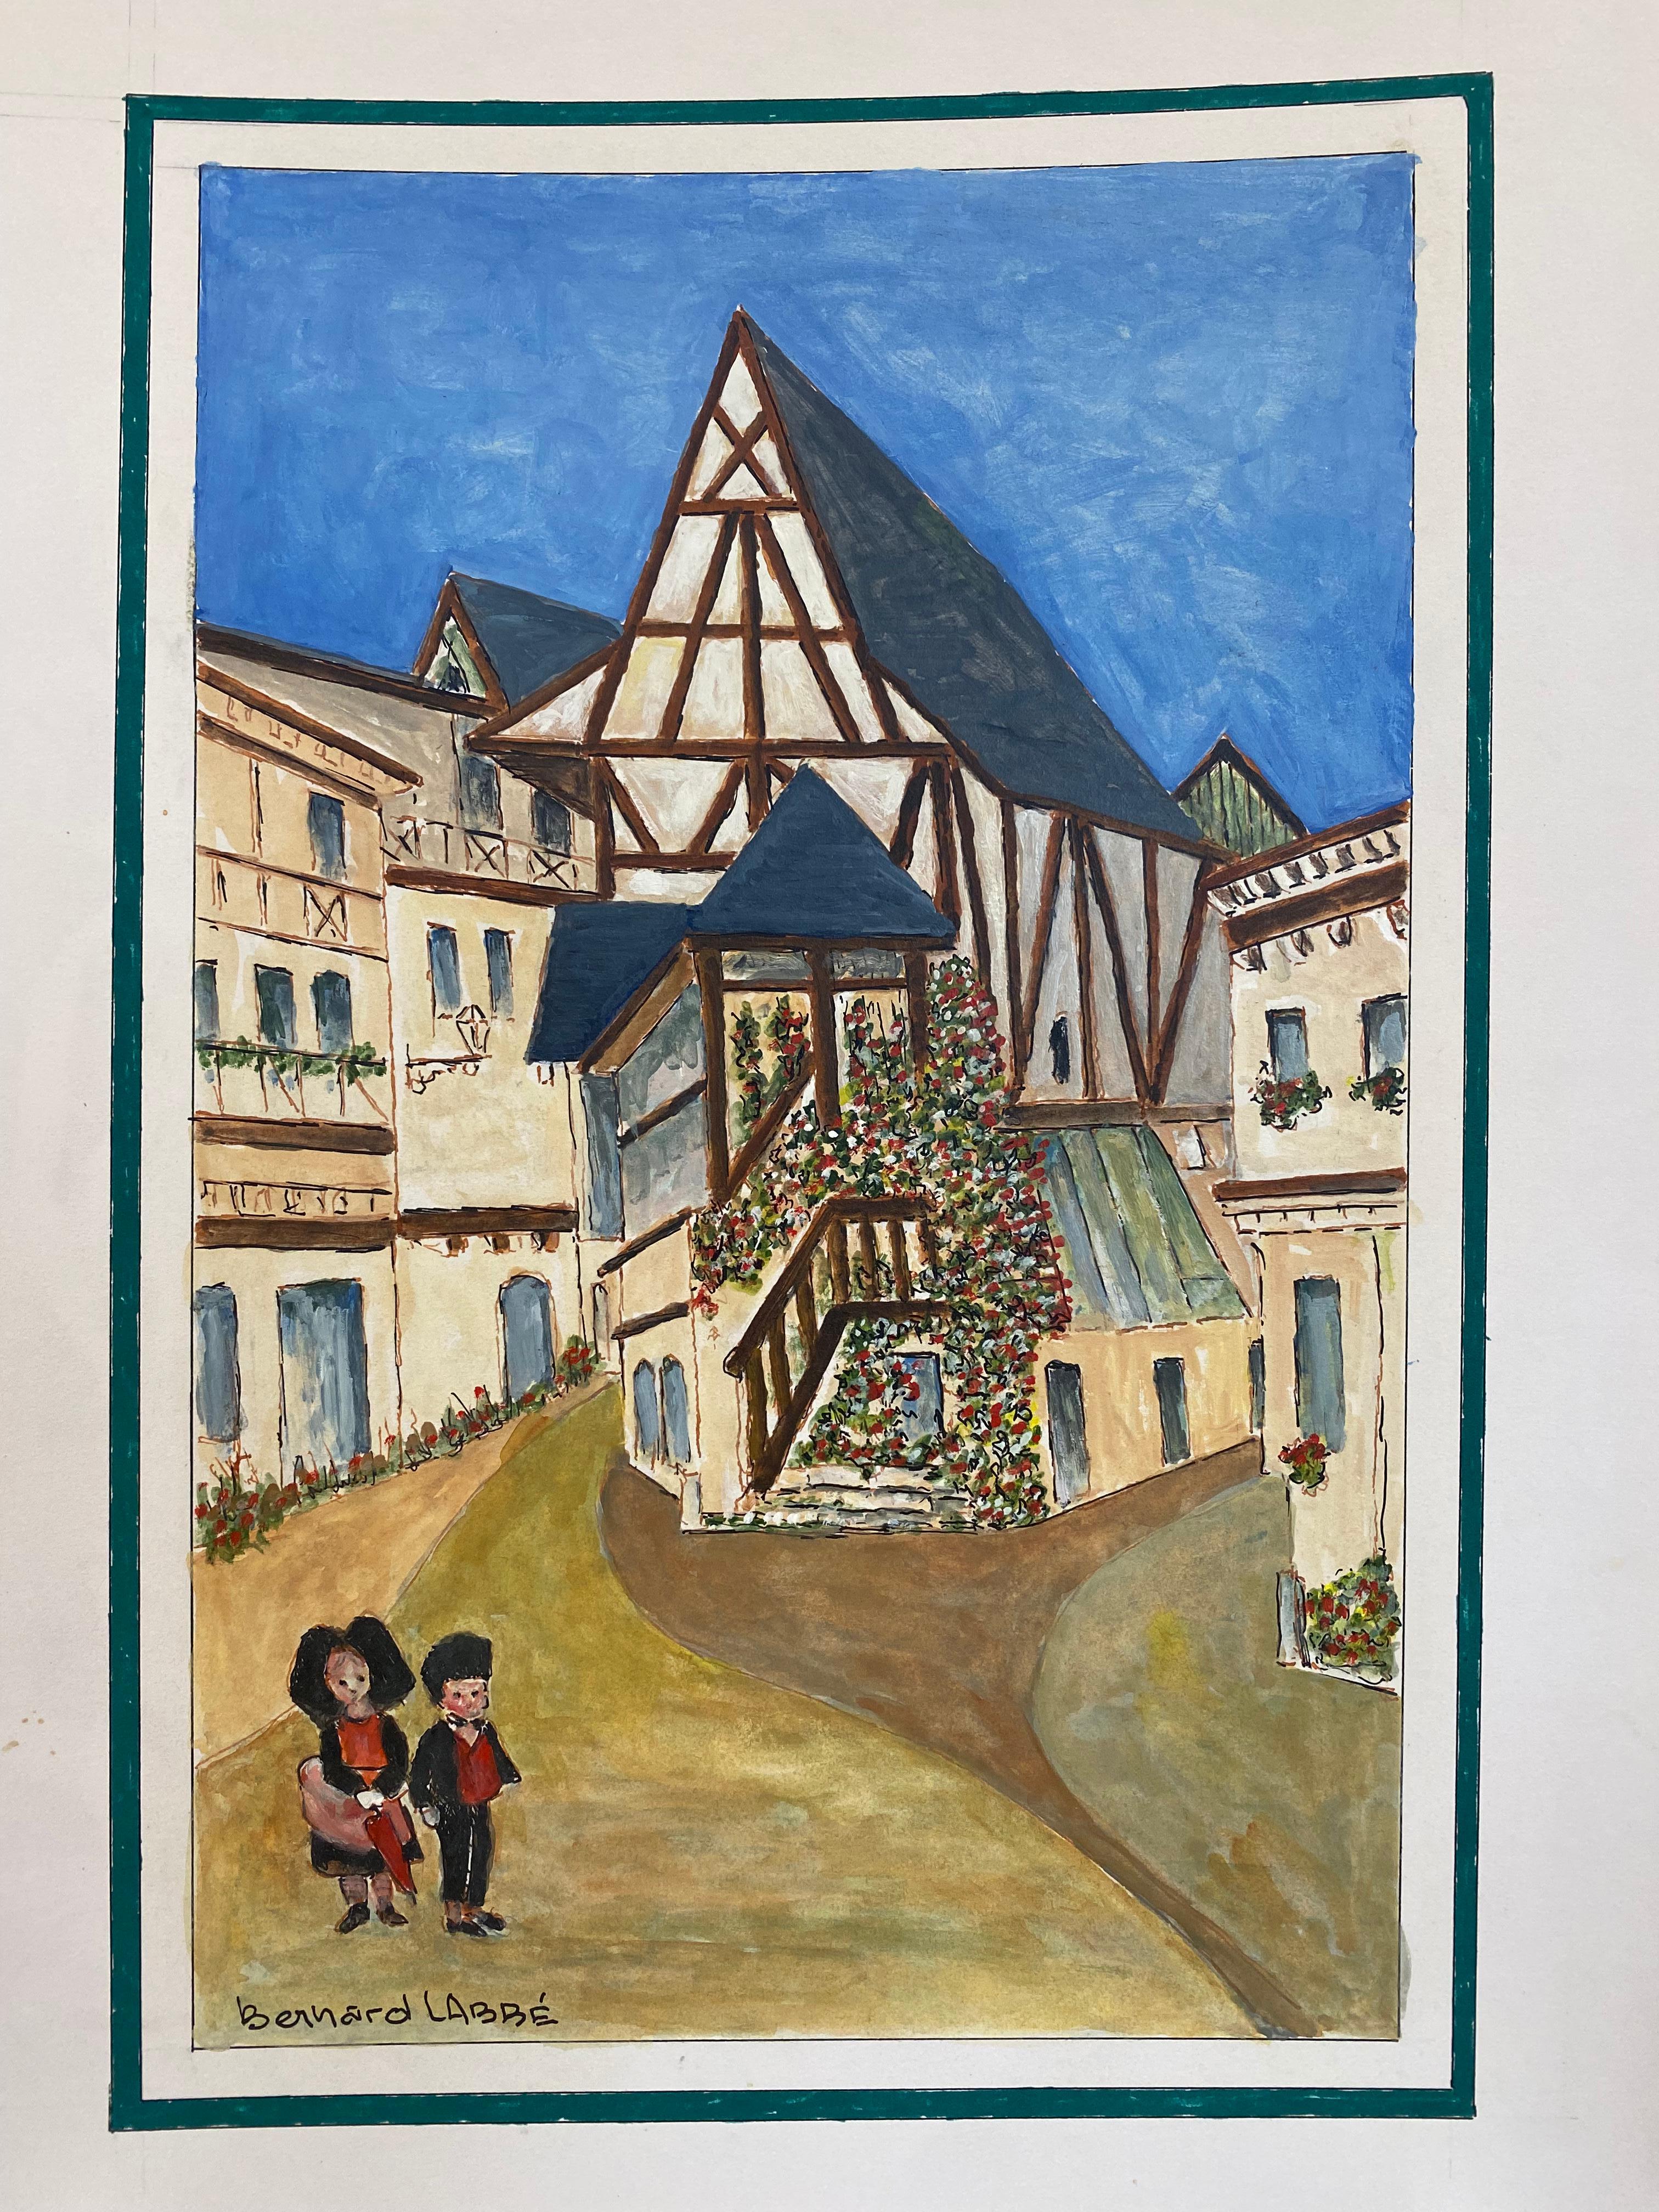 Bernard Labbe Landscape Painting - 1950's French Modernist/ Cubist Painting -Beautiful French Town With Two Figures